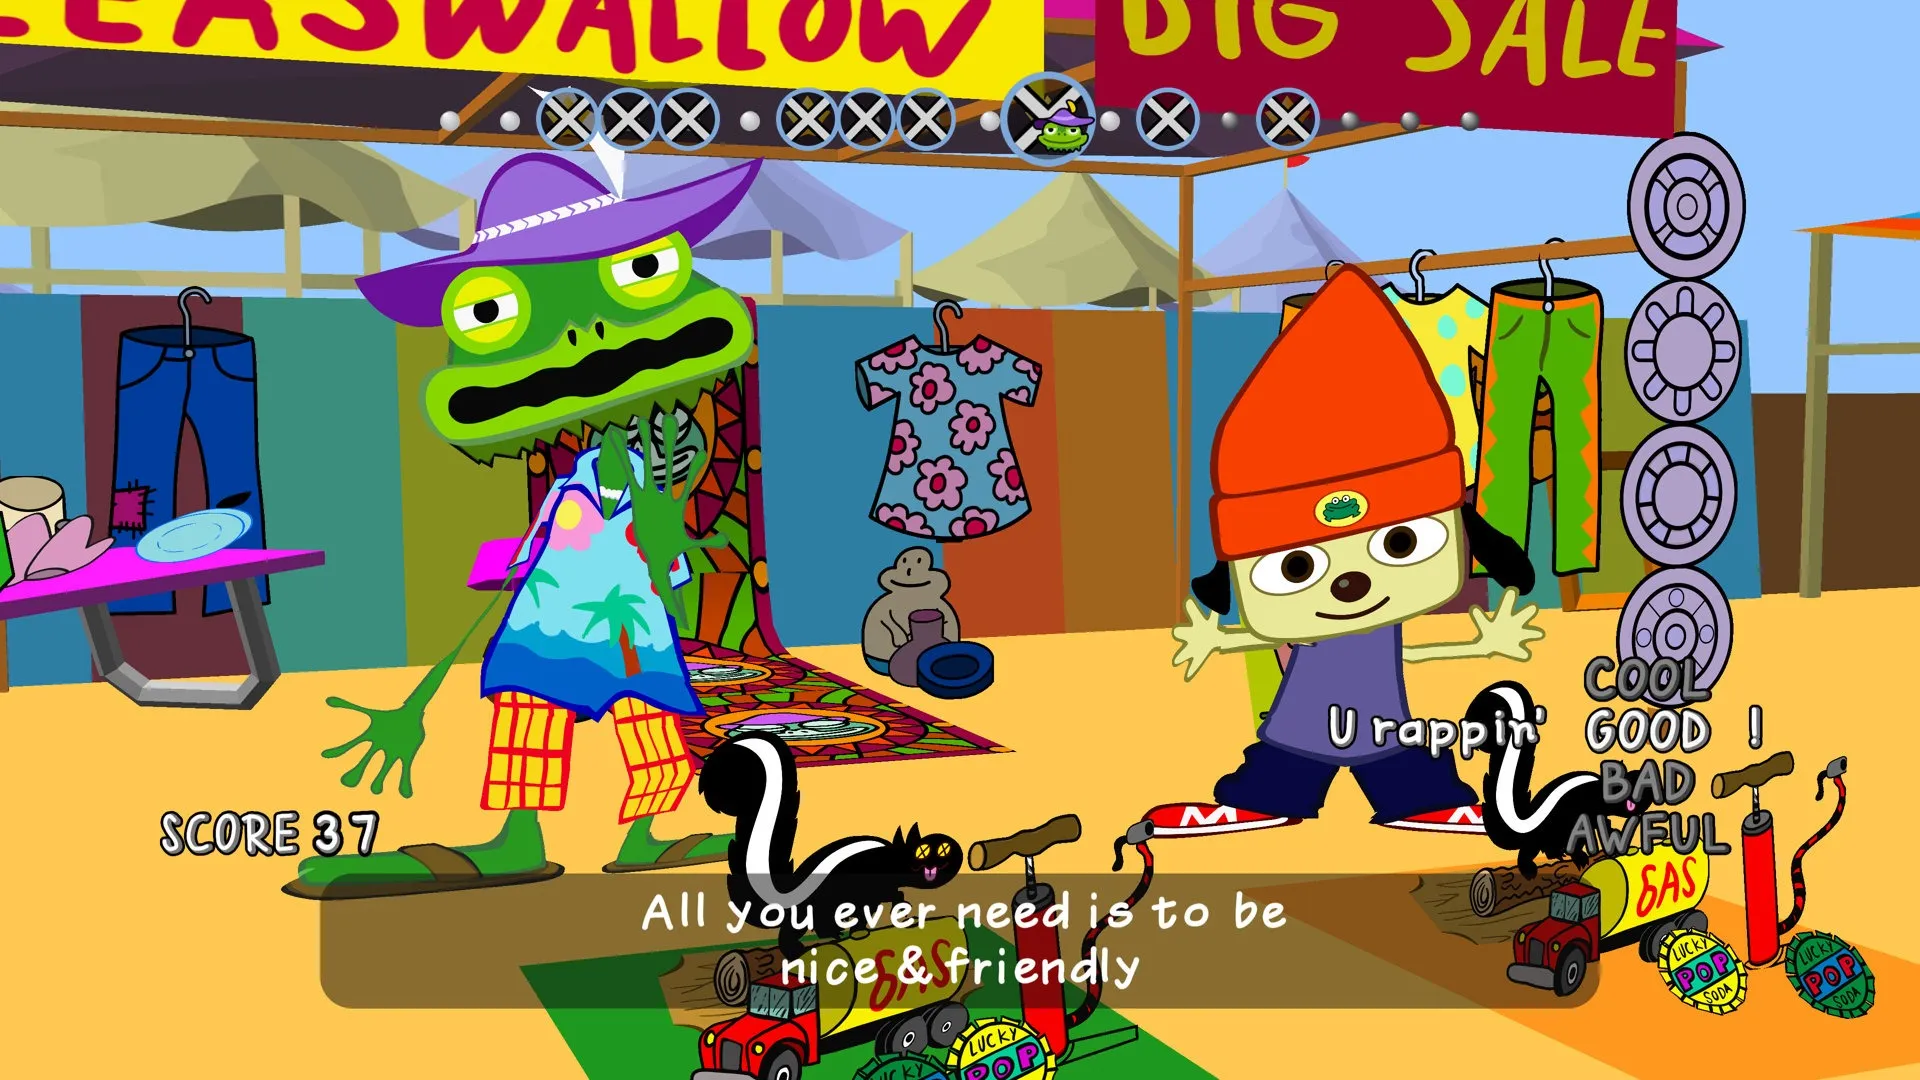 Play PaRappa the Rapper (PSX) - Online Rom